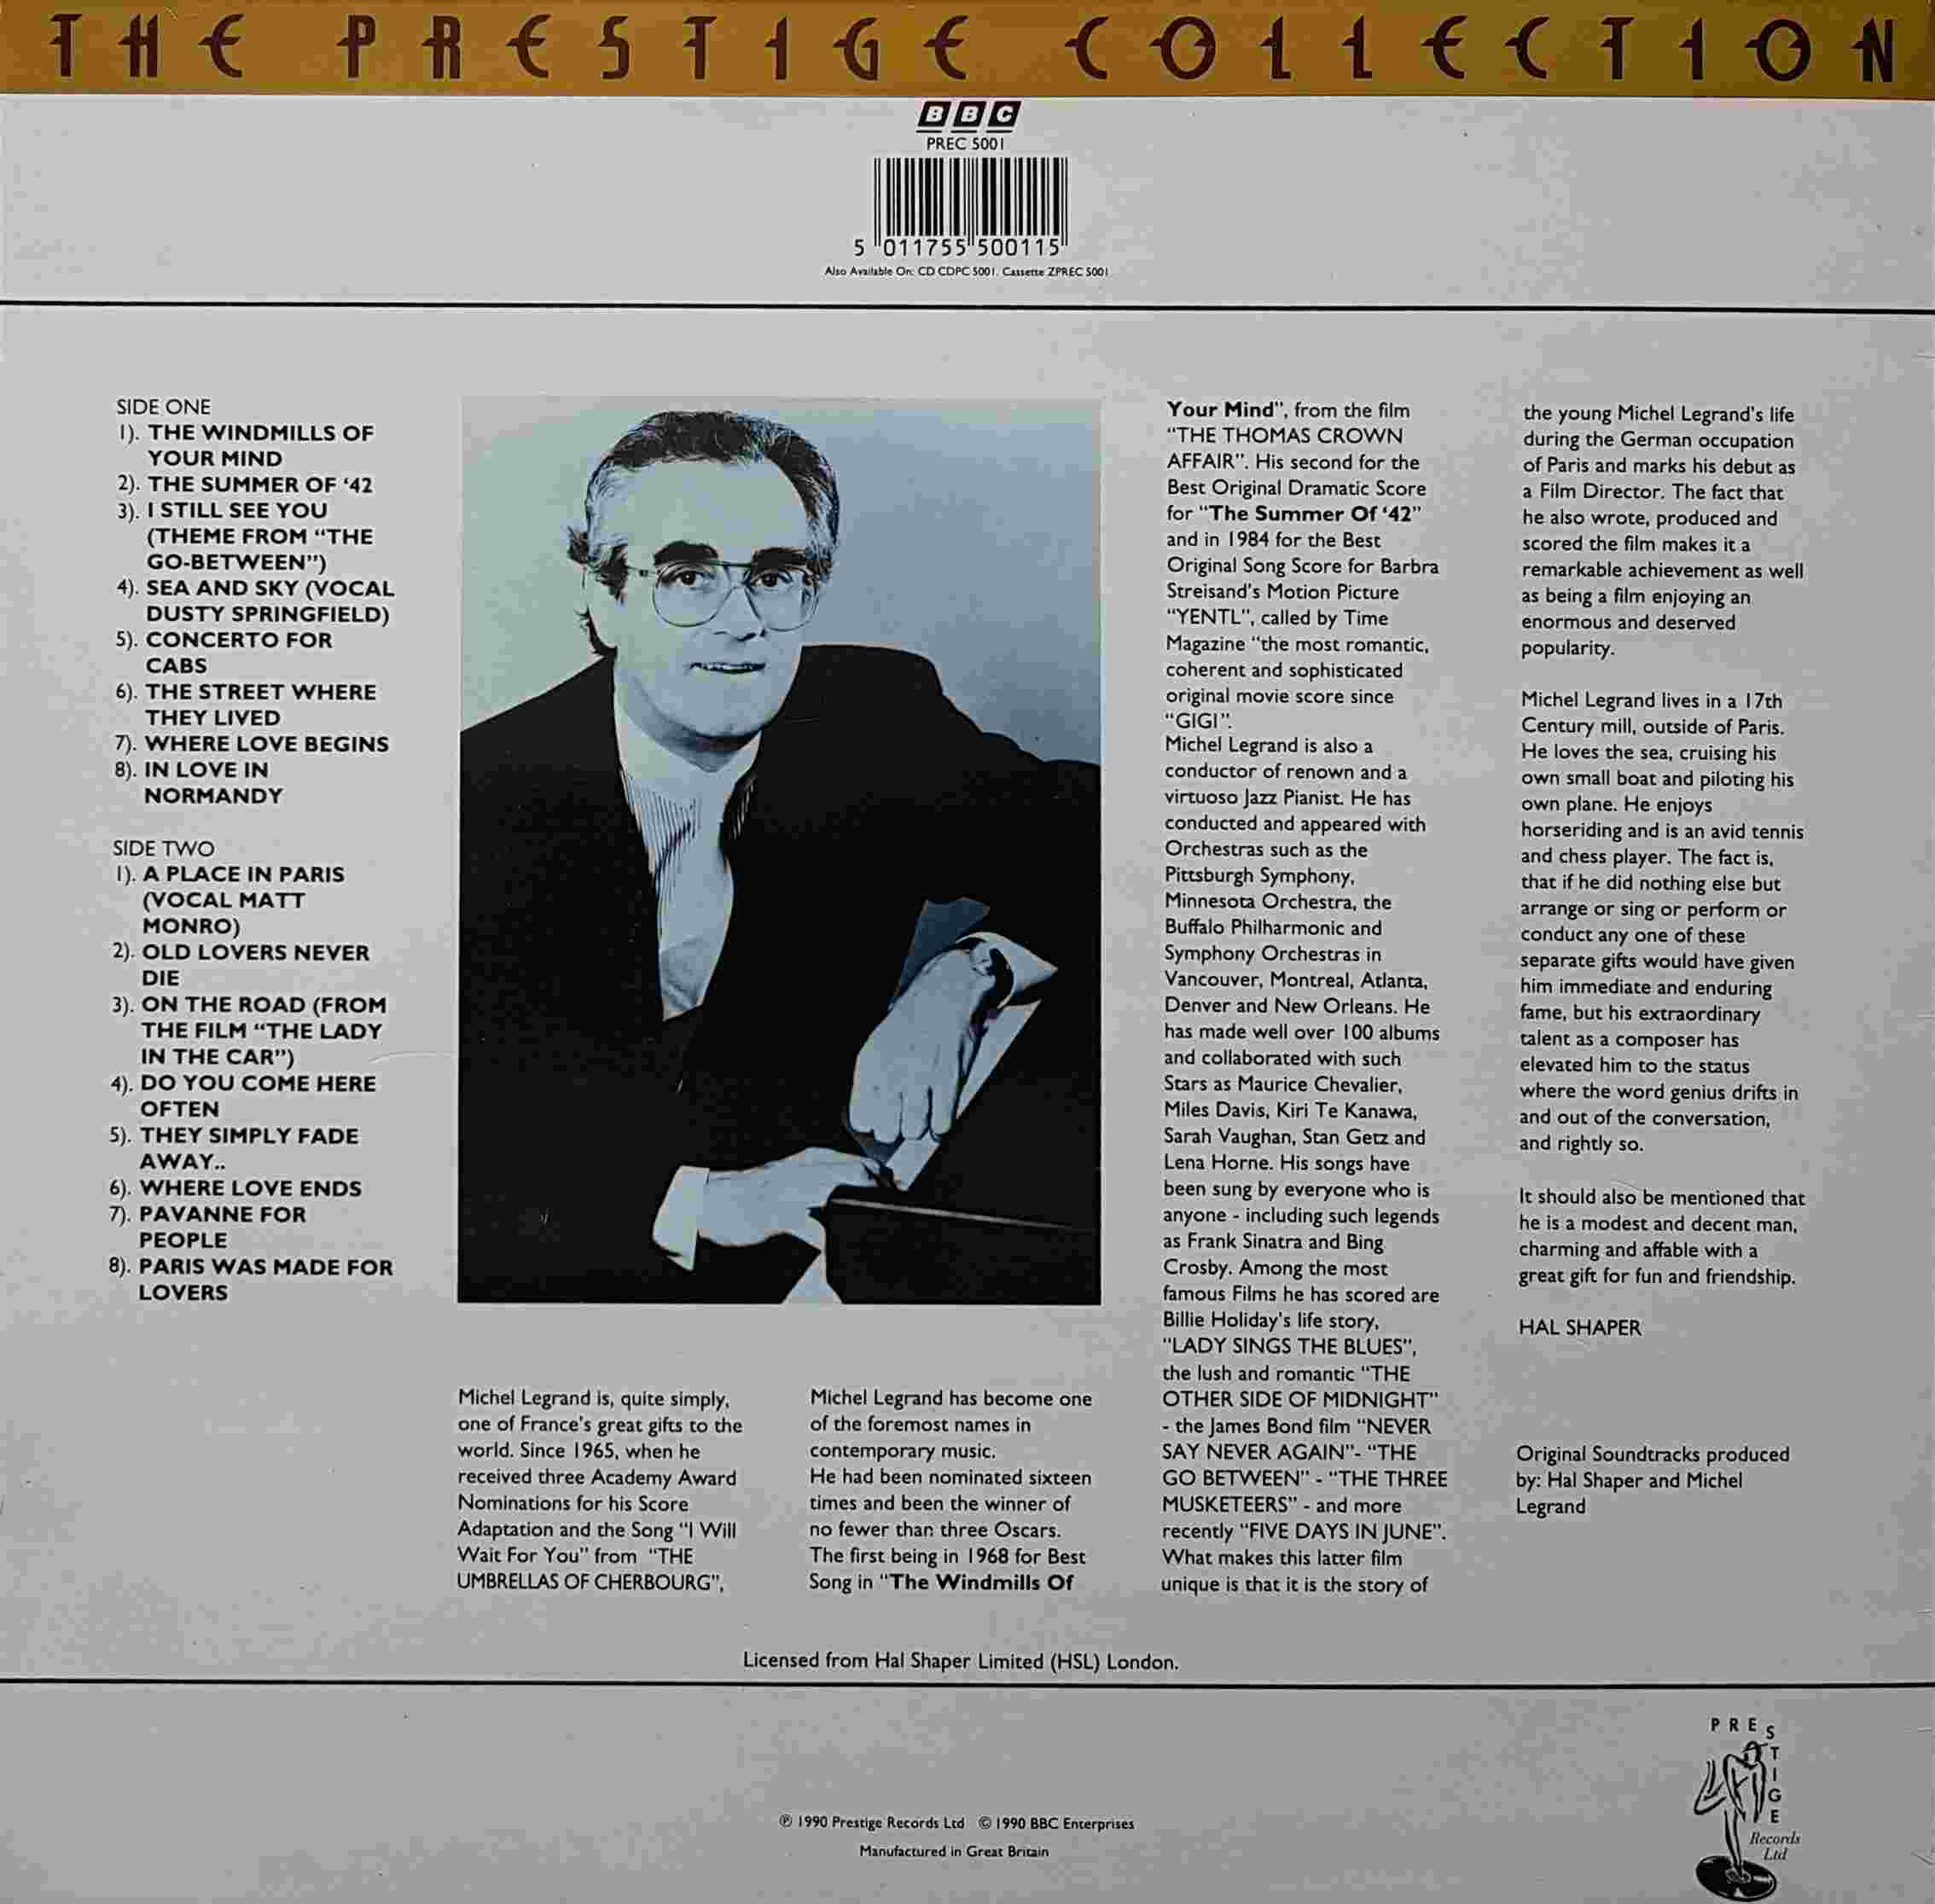 Picture of PREC 5001 Paris was made for lovers by artist Michael Legrand from the BBC records and Tapes library